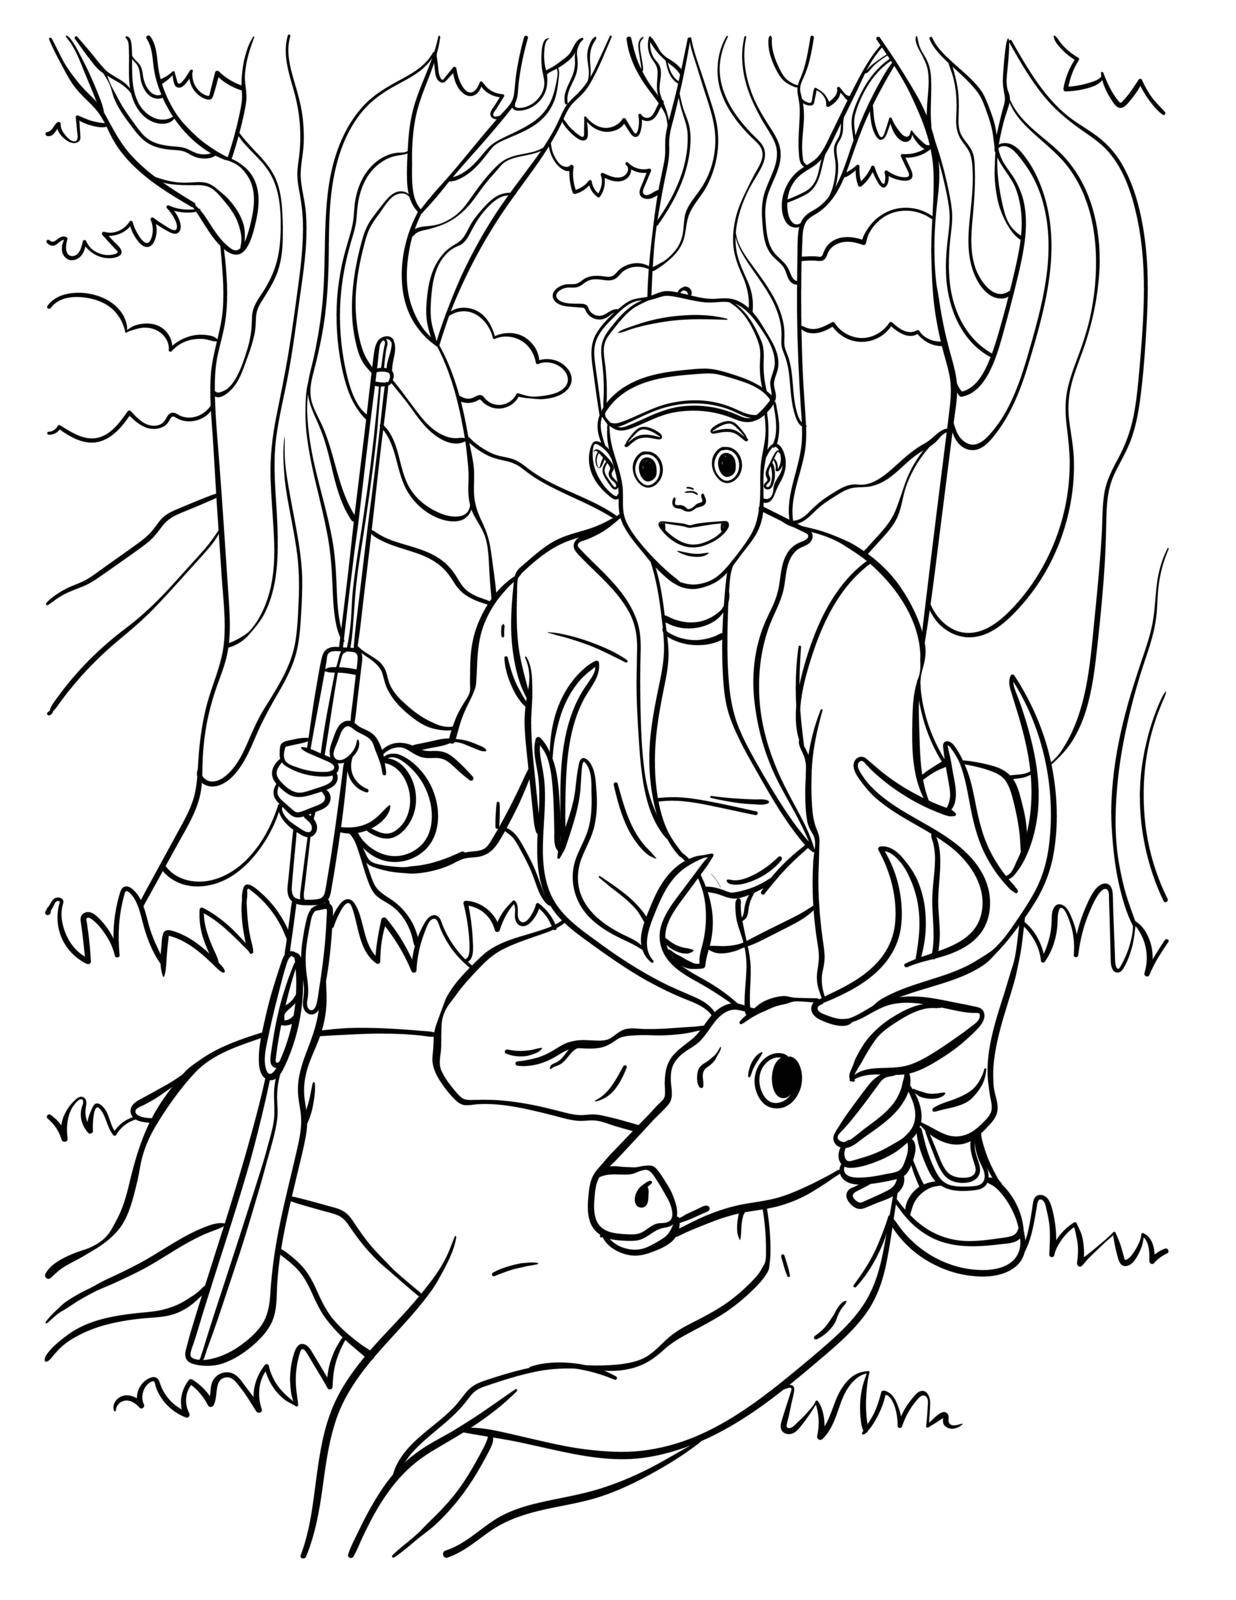 A cute and funny coloring page of Deer Hunting. Provides hours of coloring fun for children. To color, this page is very easy. Suitable for little kids and toddlers.